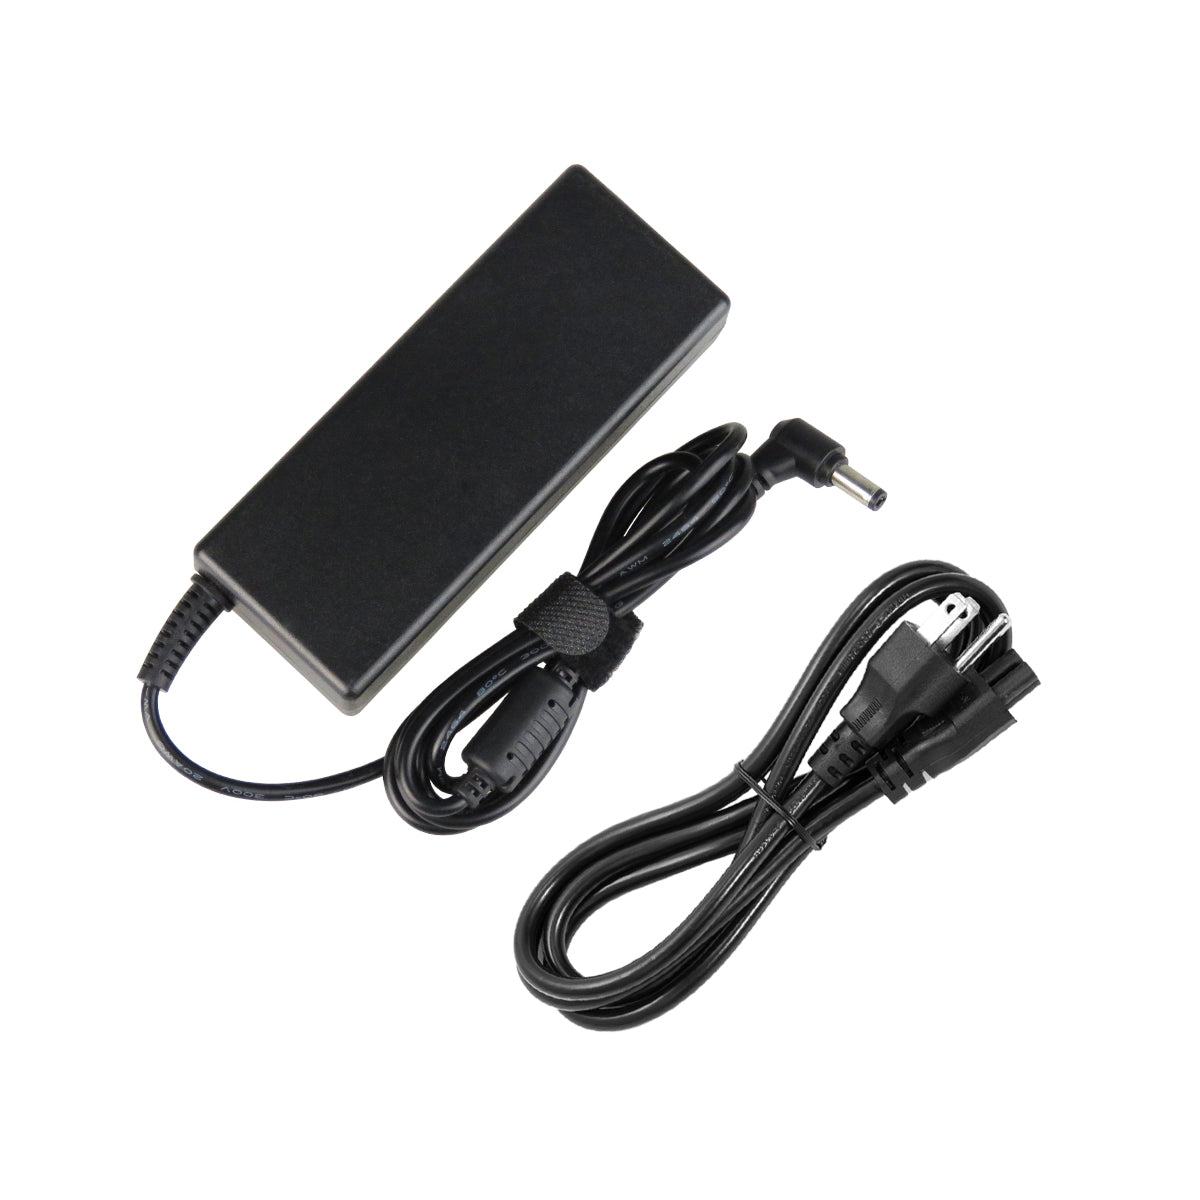 AC Adapter Charger for Toshiba Satellite p75 Notebook.